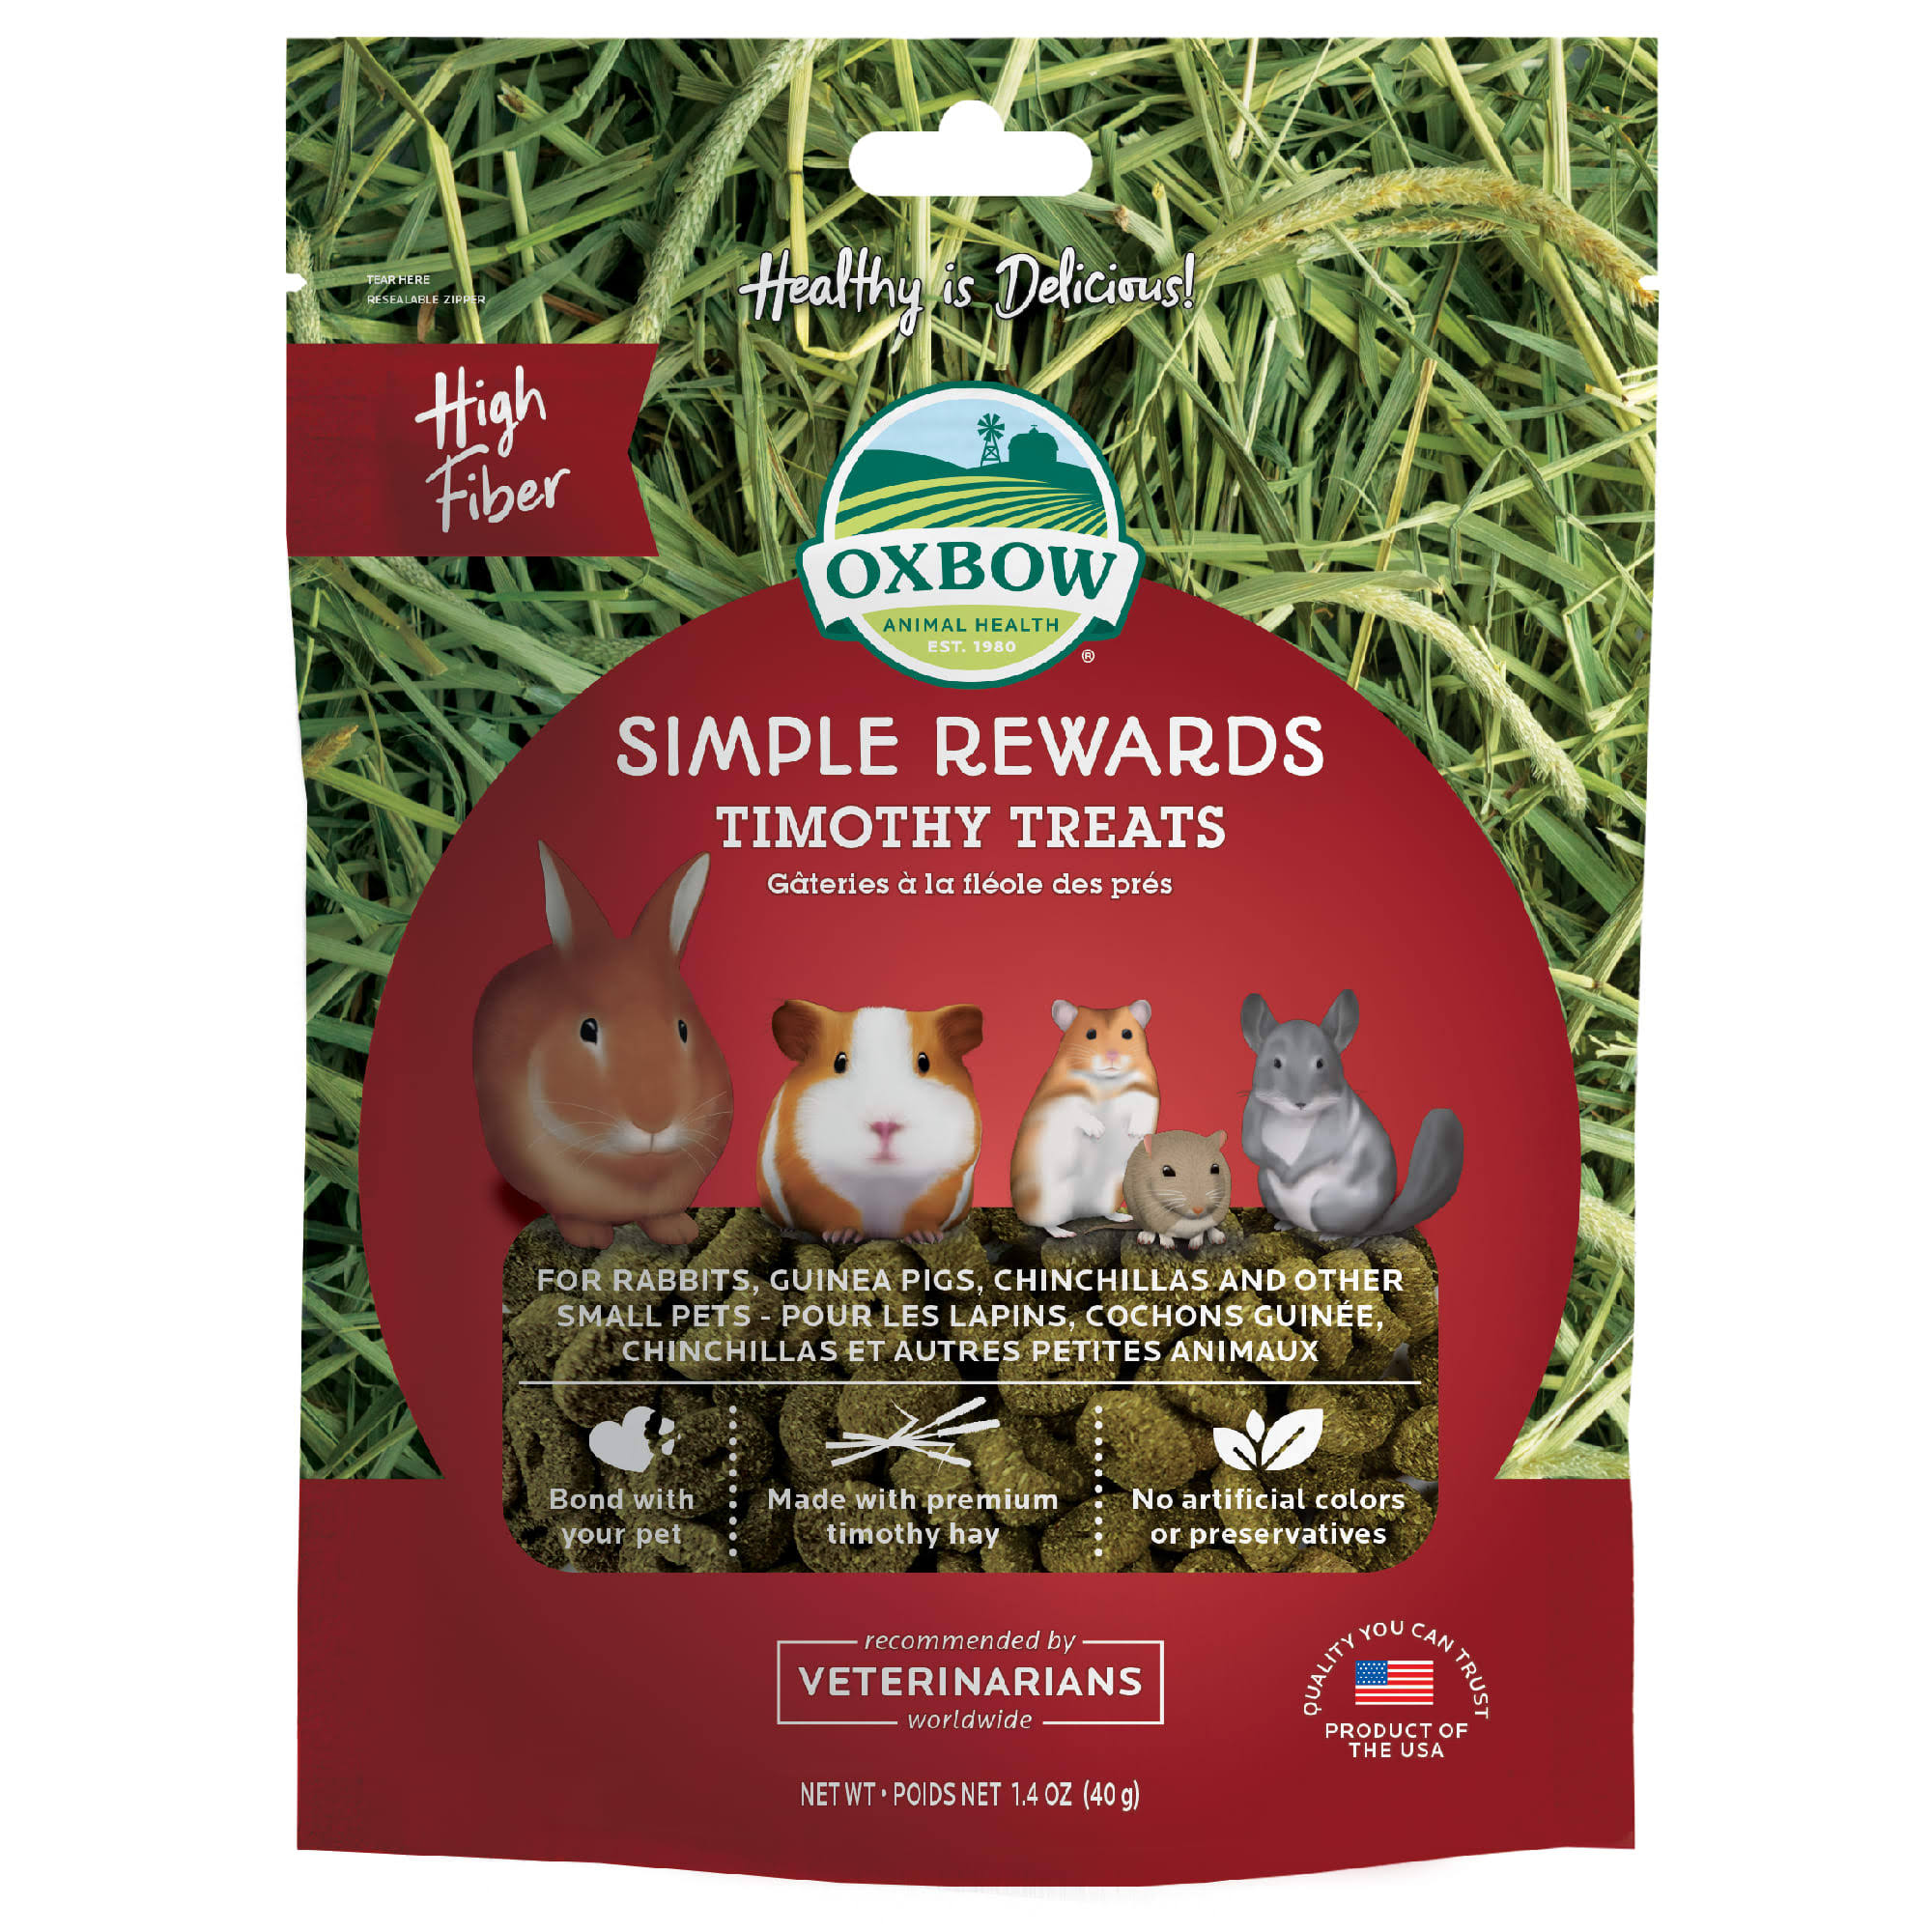 Oxbow Simple Rewards All Natural Hay Small Animals Treat - Timothy Grass, 0.5oz